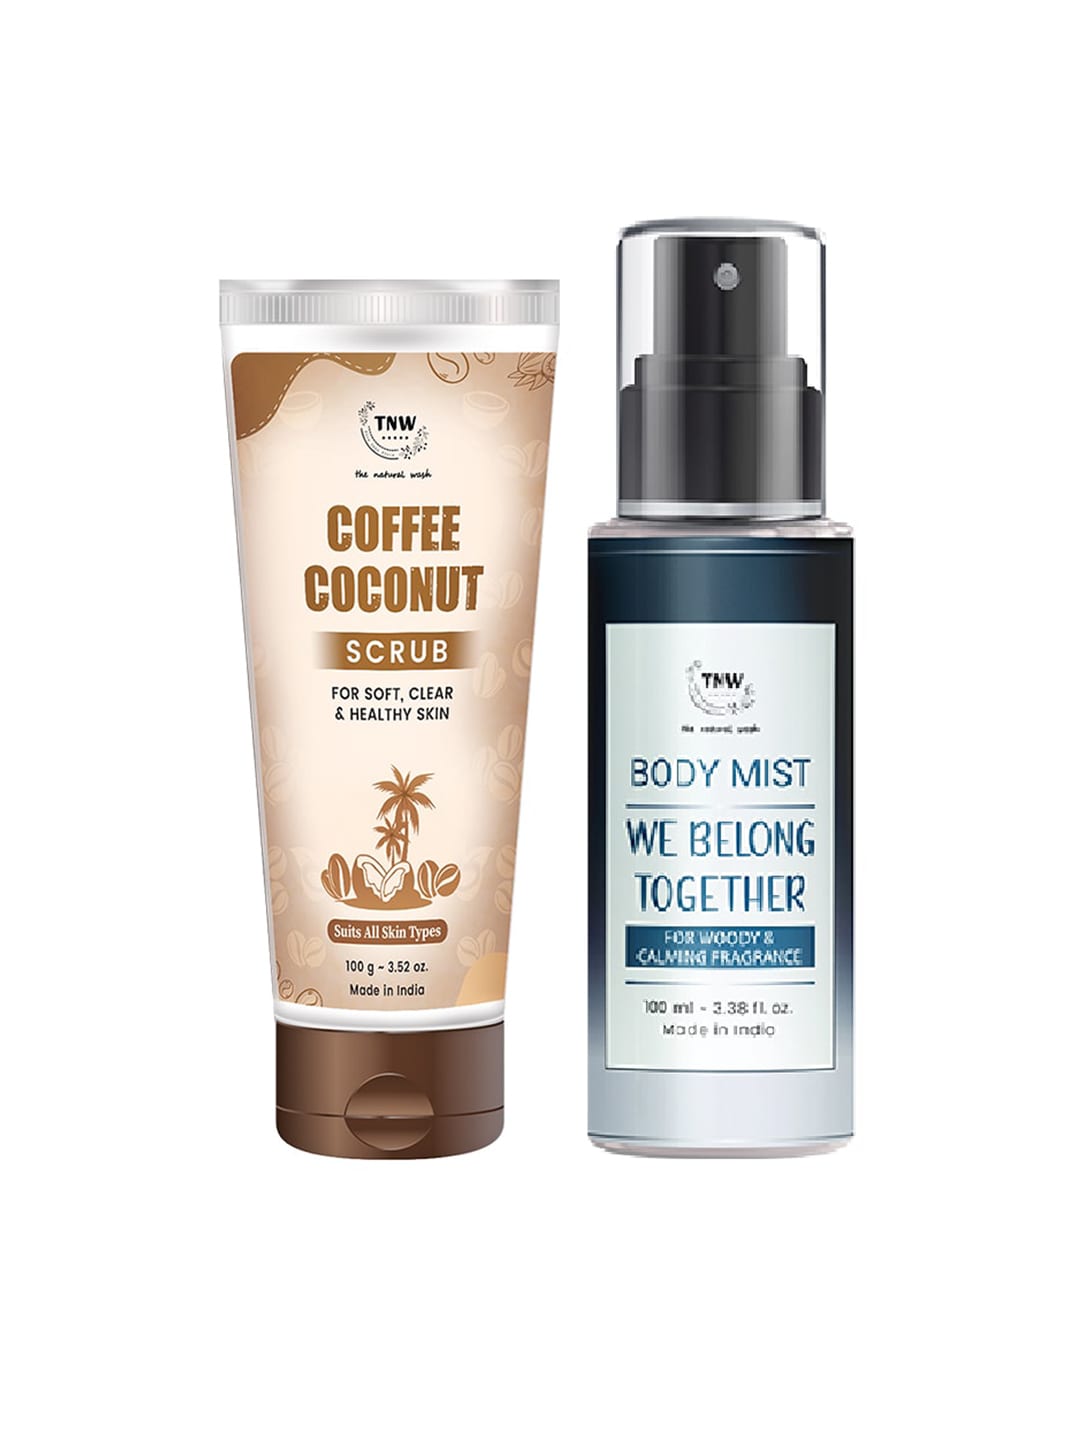 TNW the natural wash Set of We Belong Together Body Mist 100ml & Coffee Coconut Scrub 100g Price in India